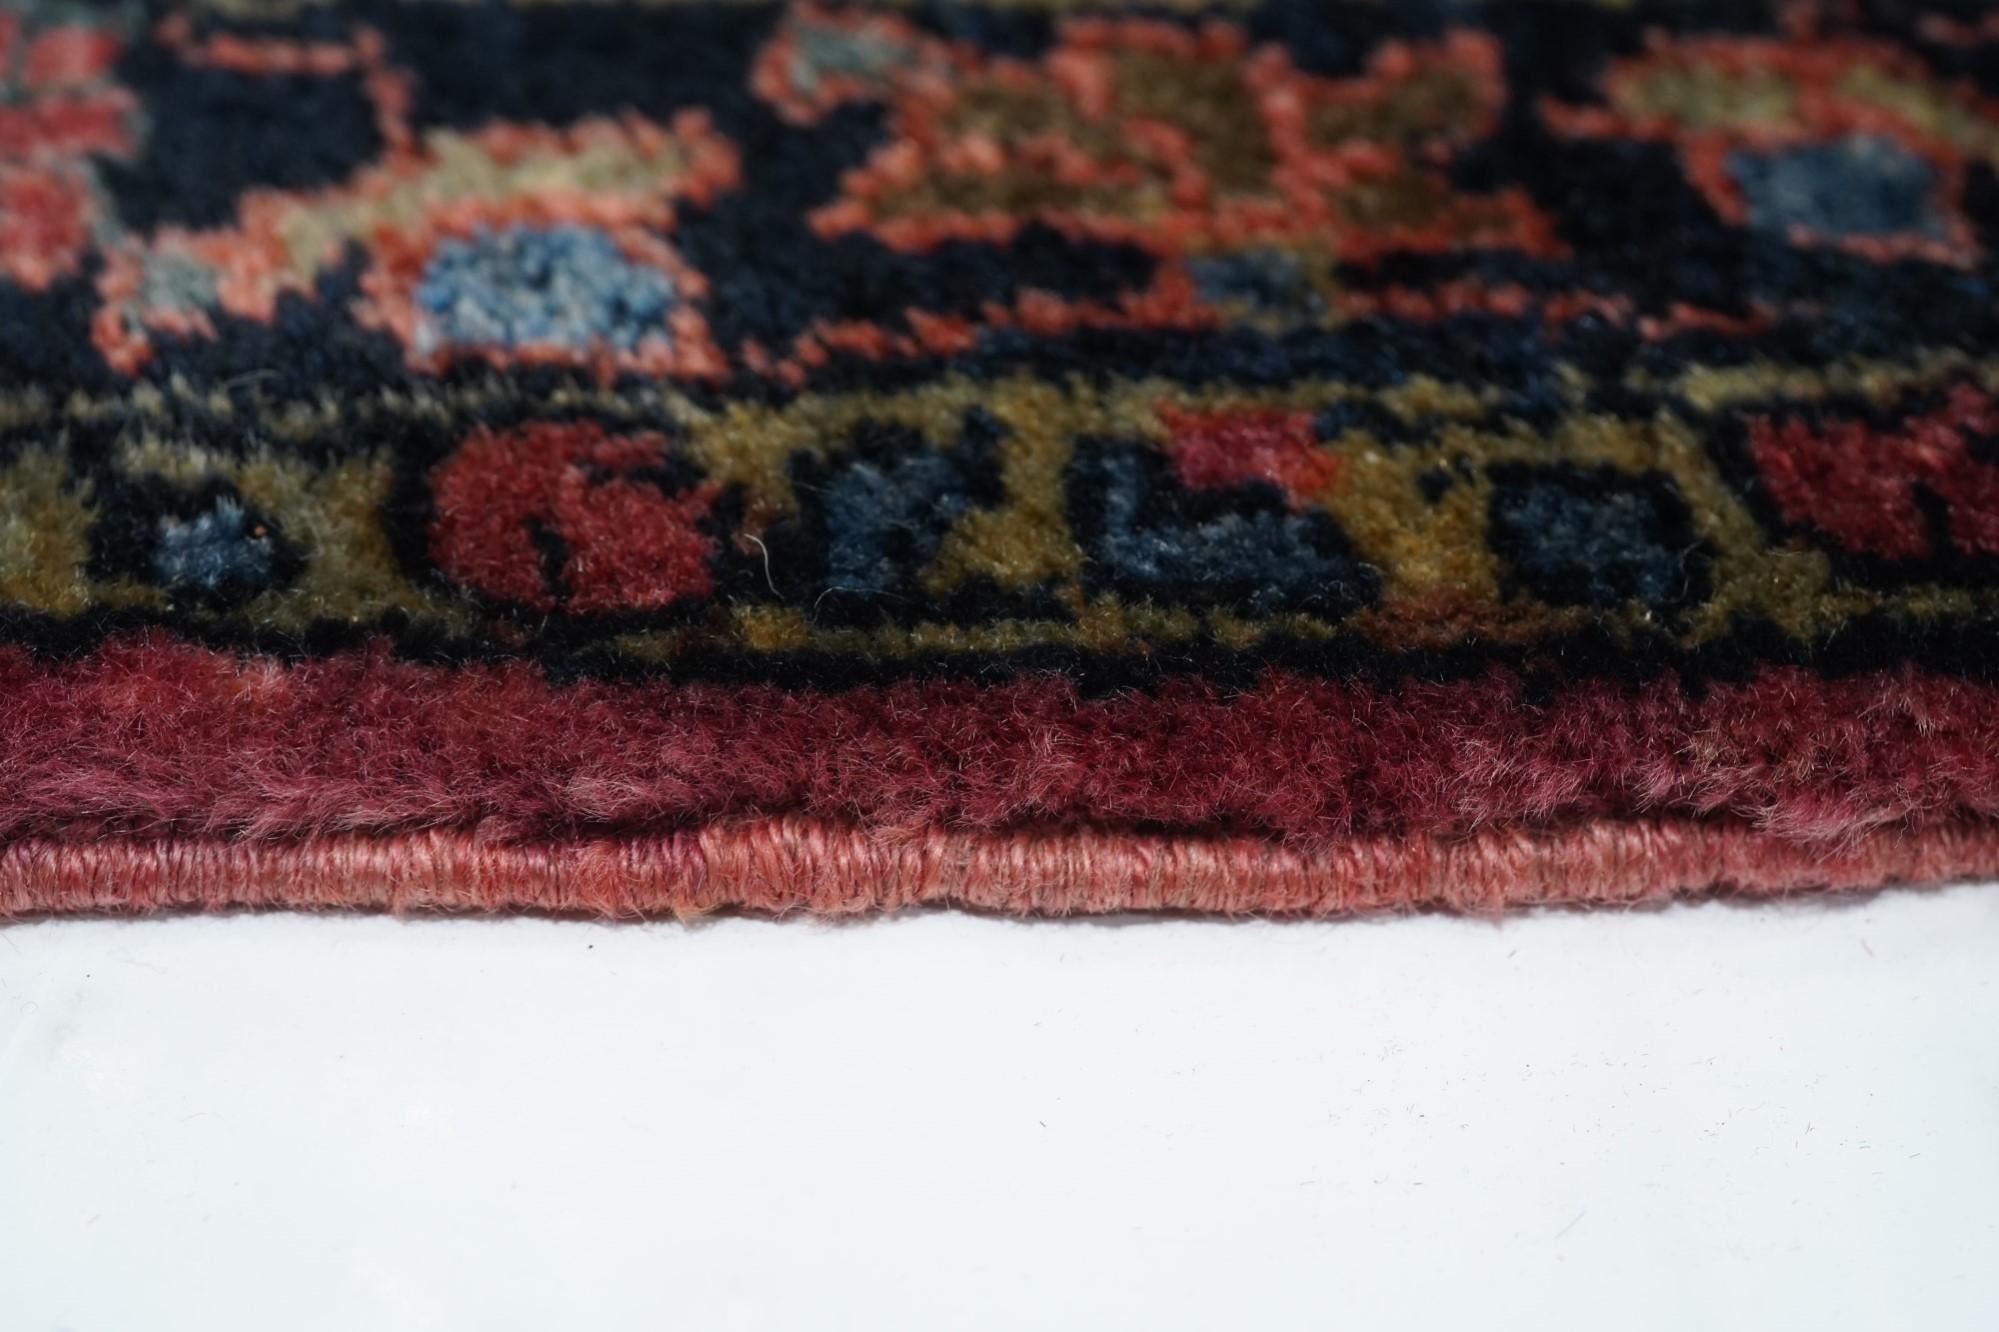 Early 20th Century Antique Sarouk Rug For Sale